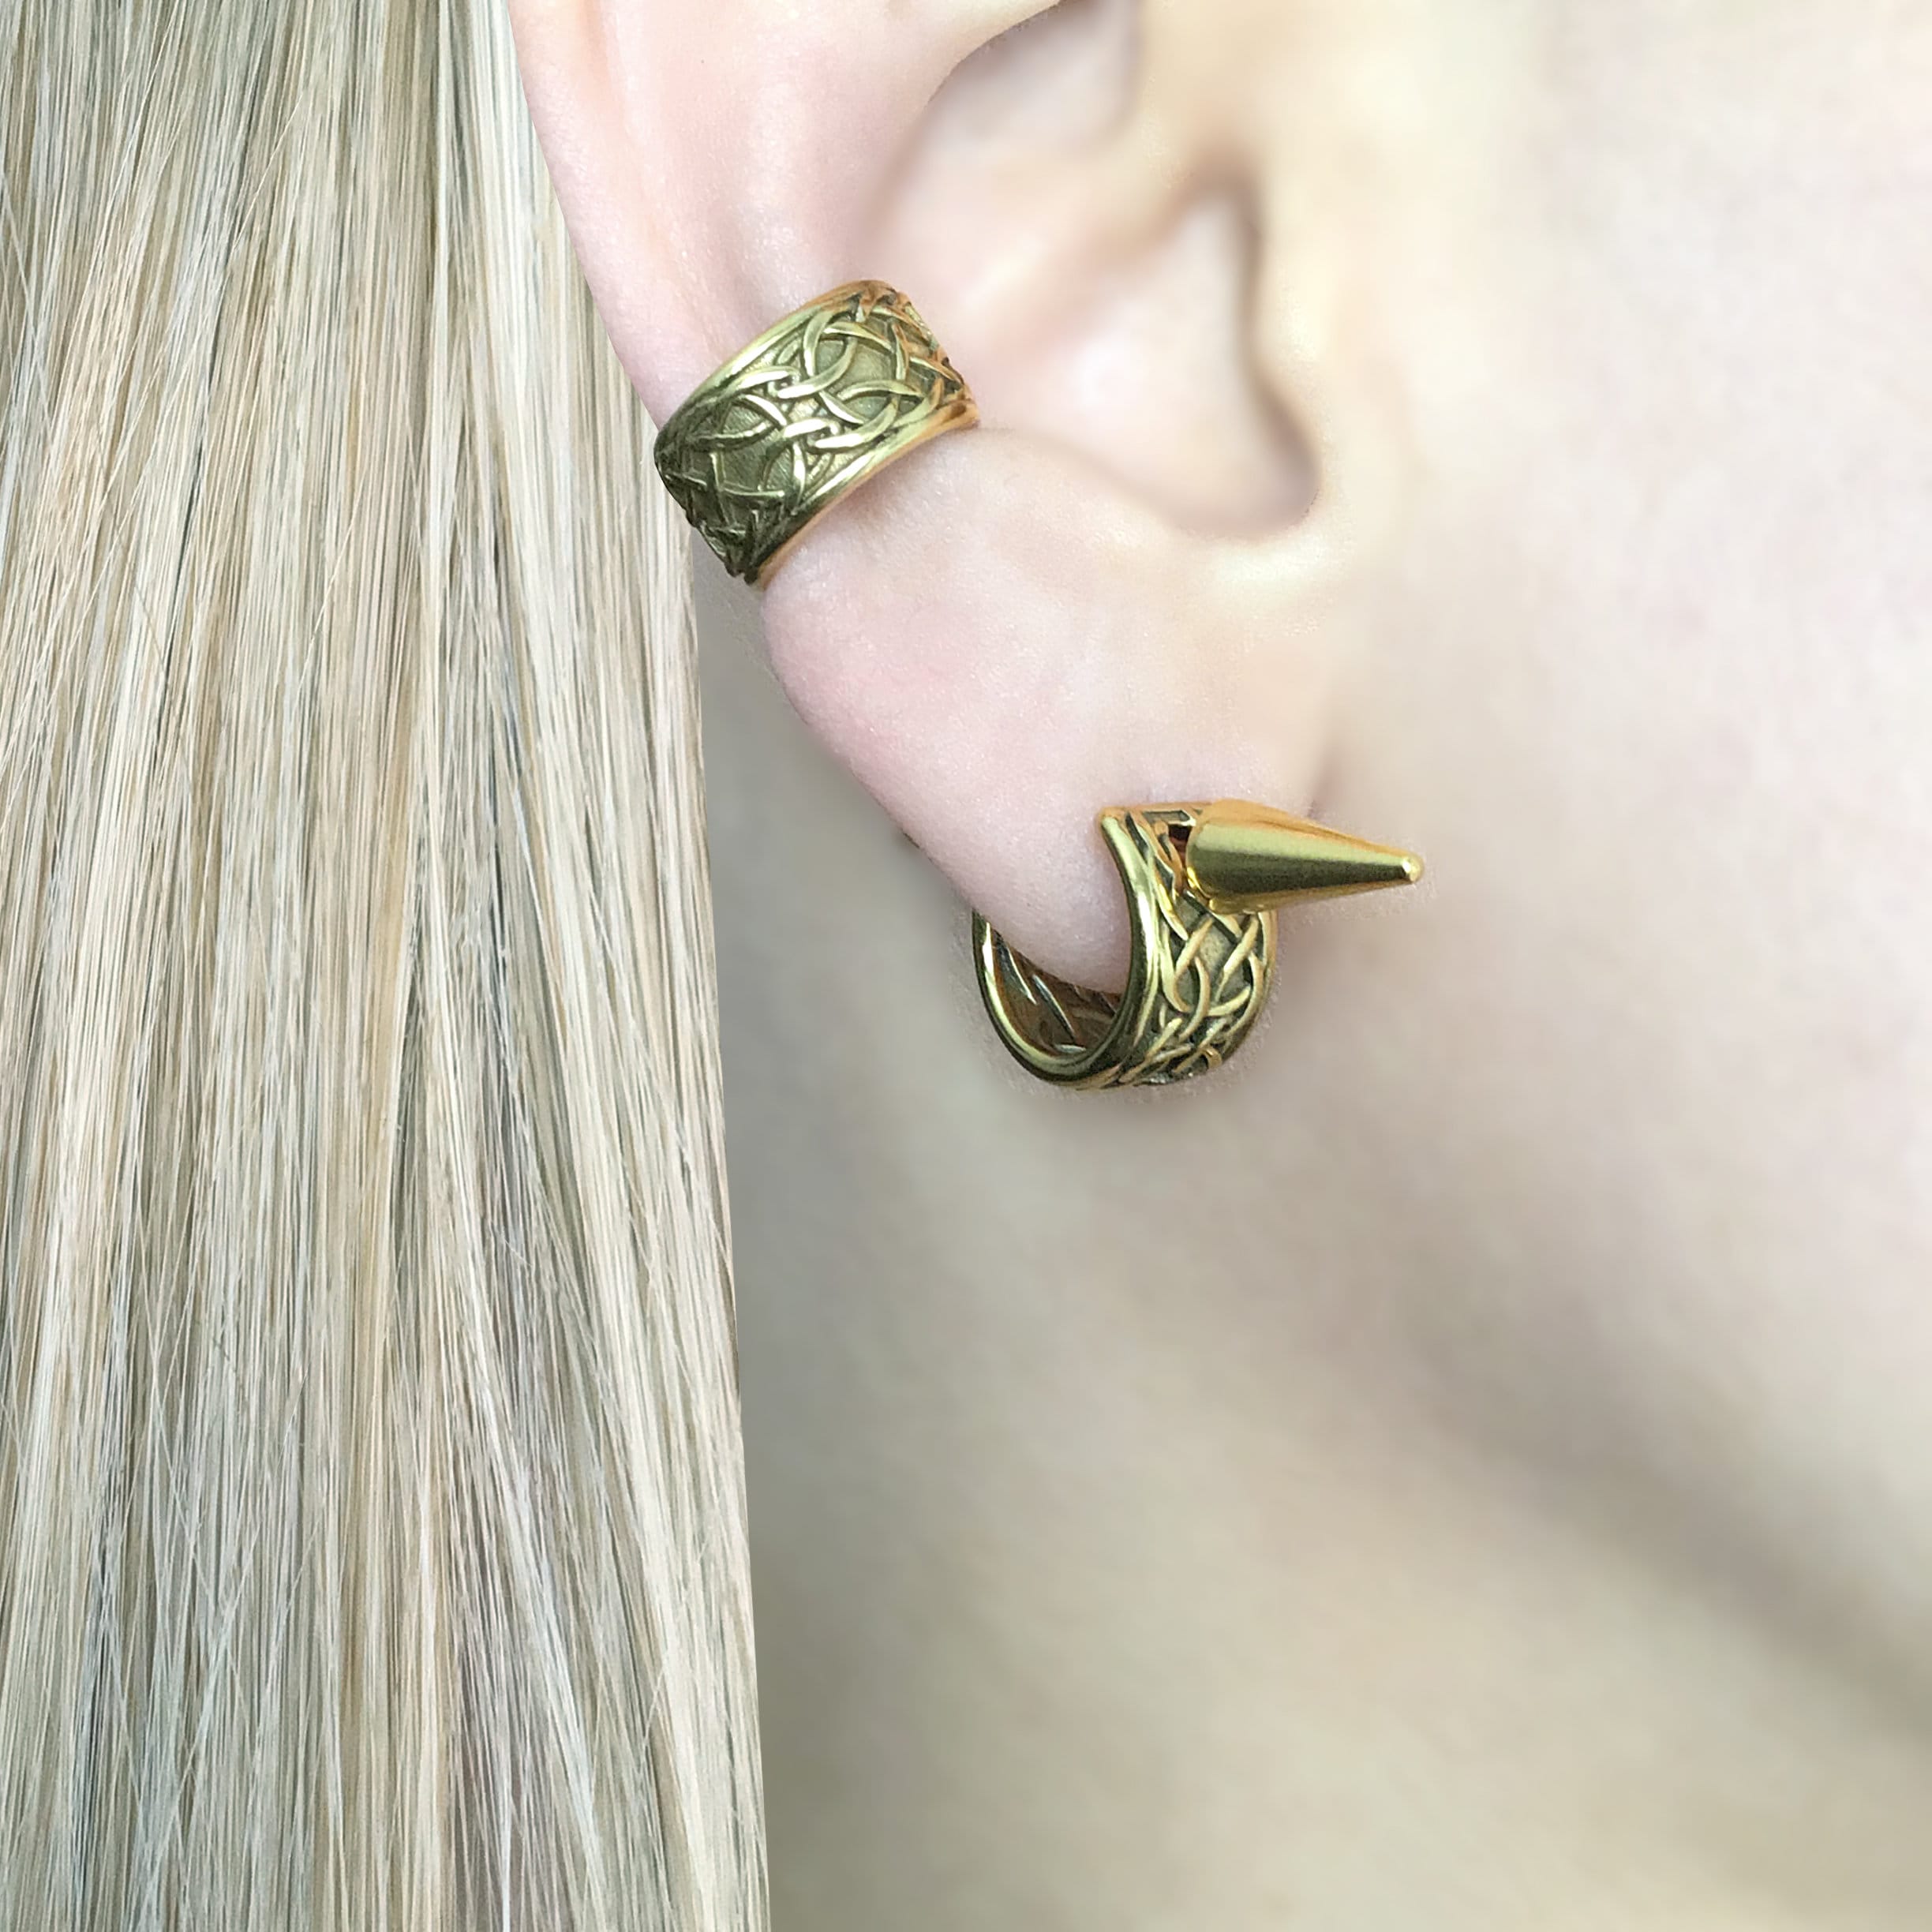 CELTIC HOOP EARRINGS WITH SPIKES IN GOLD